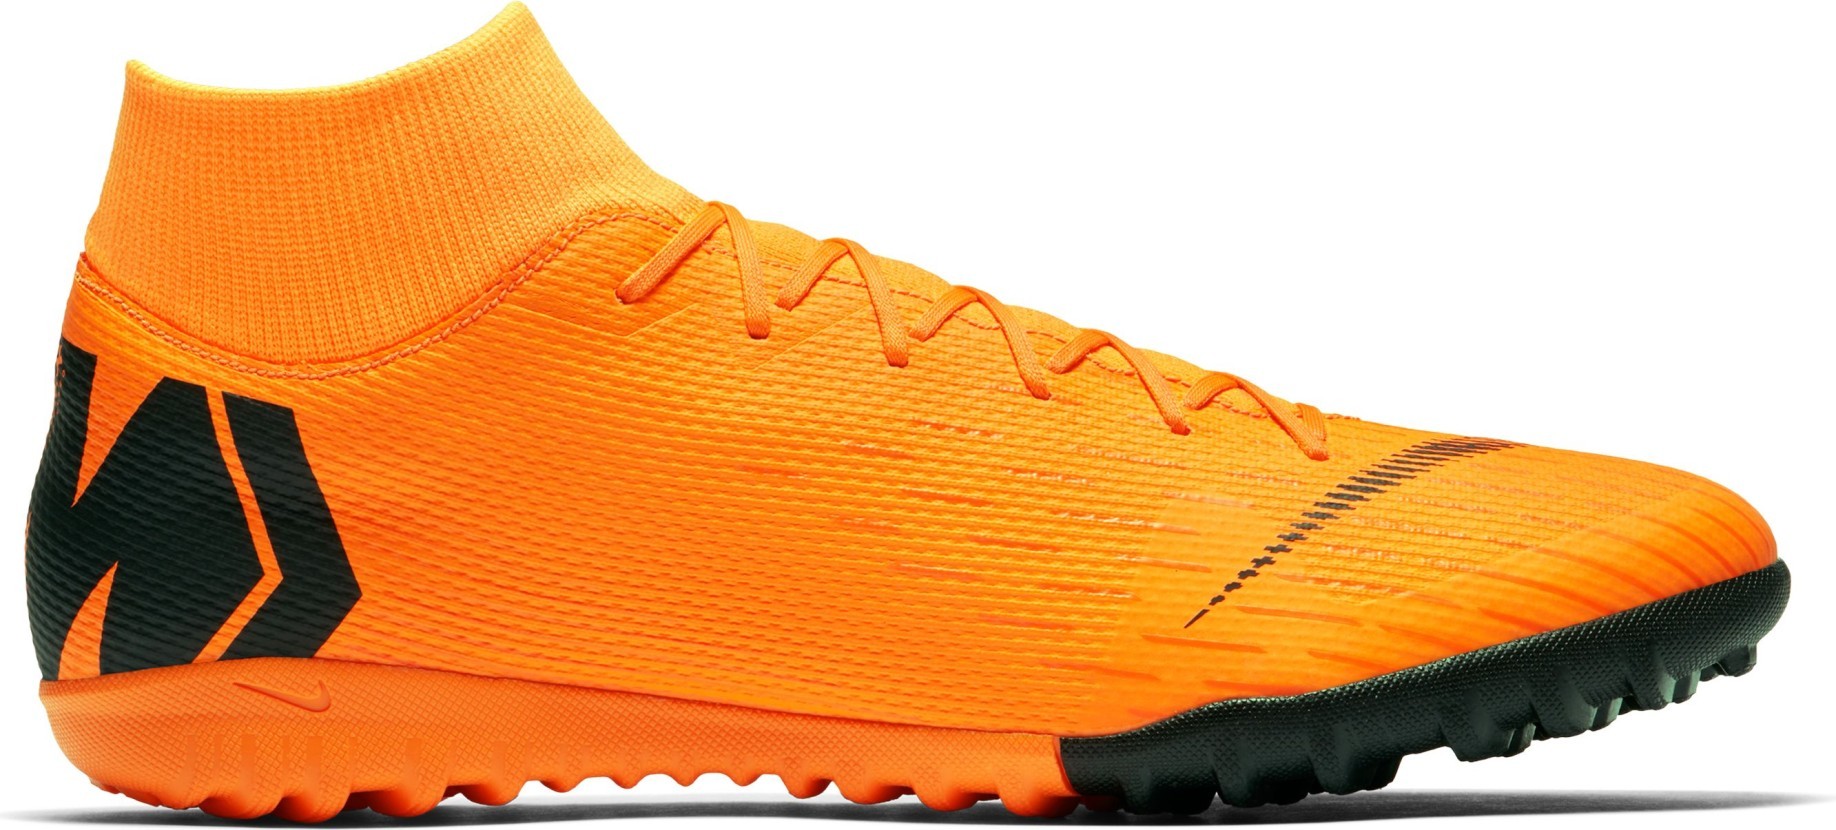 Nike Mercurial Superfly 6 REVIEW Best Nike Boot Ever.